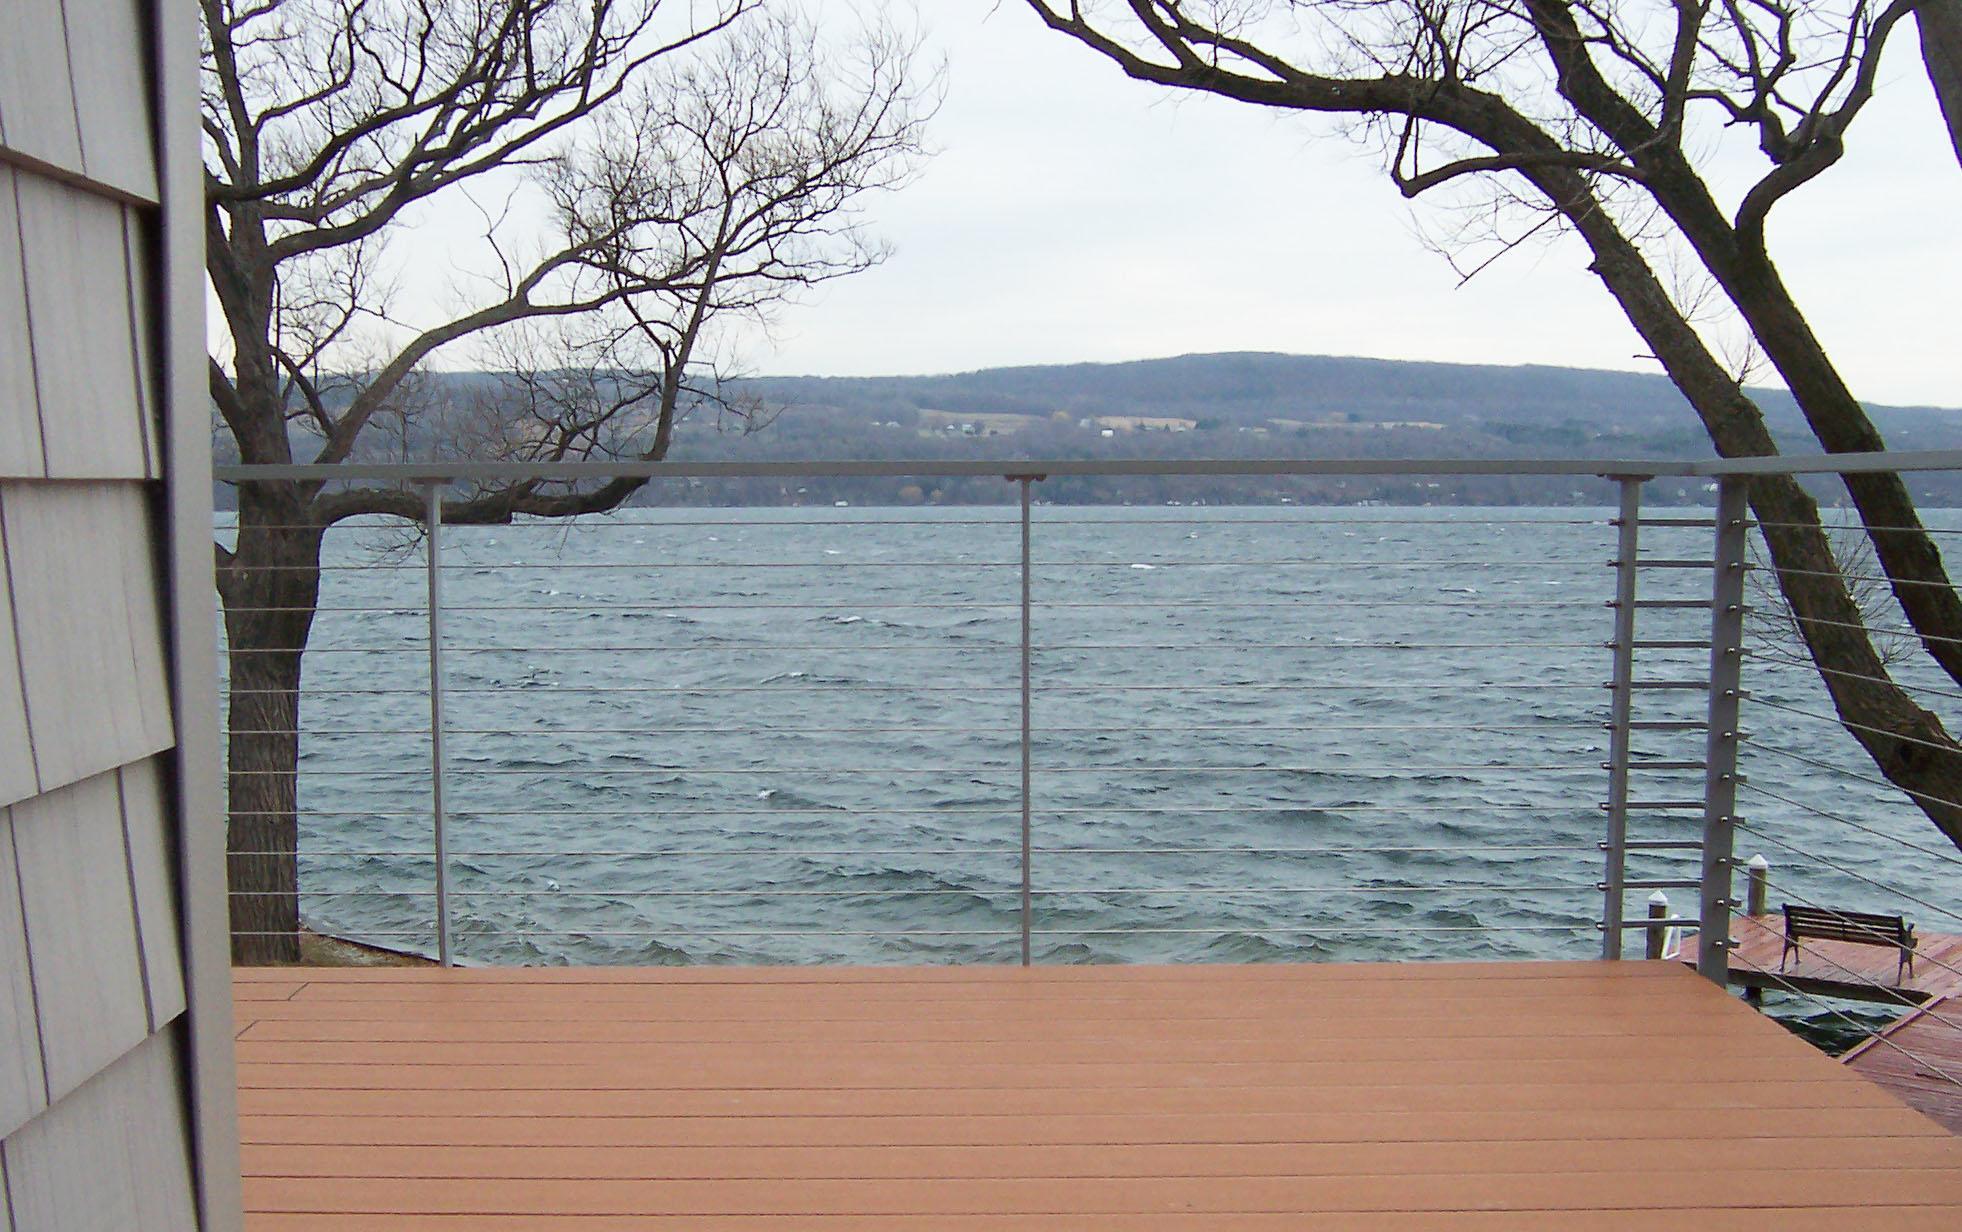 Cable railing for a deck on Seneca lake in the beautiful Finger Lakes region